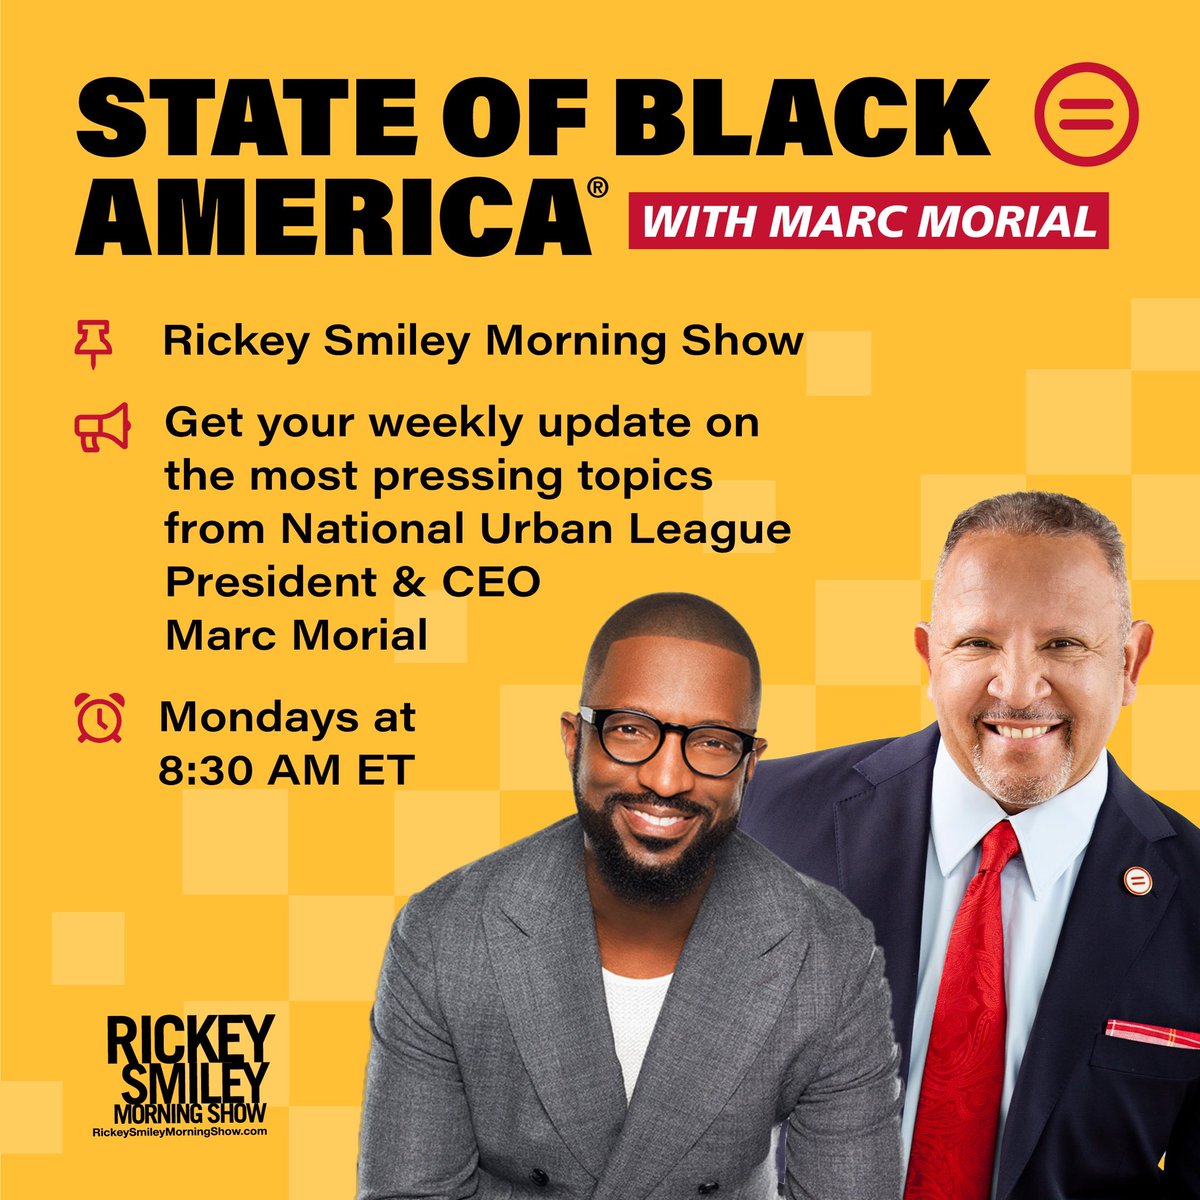 ⏰ Set your alarm! Tune in at 8:30 AM ET to @MarcMorial’s State of Black America segment on @TheRSMS. 🎧 Find your local station: rickeysmileymorningshow.com/affiliates.